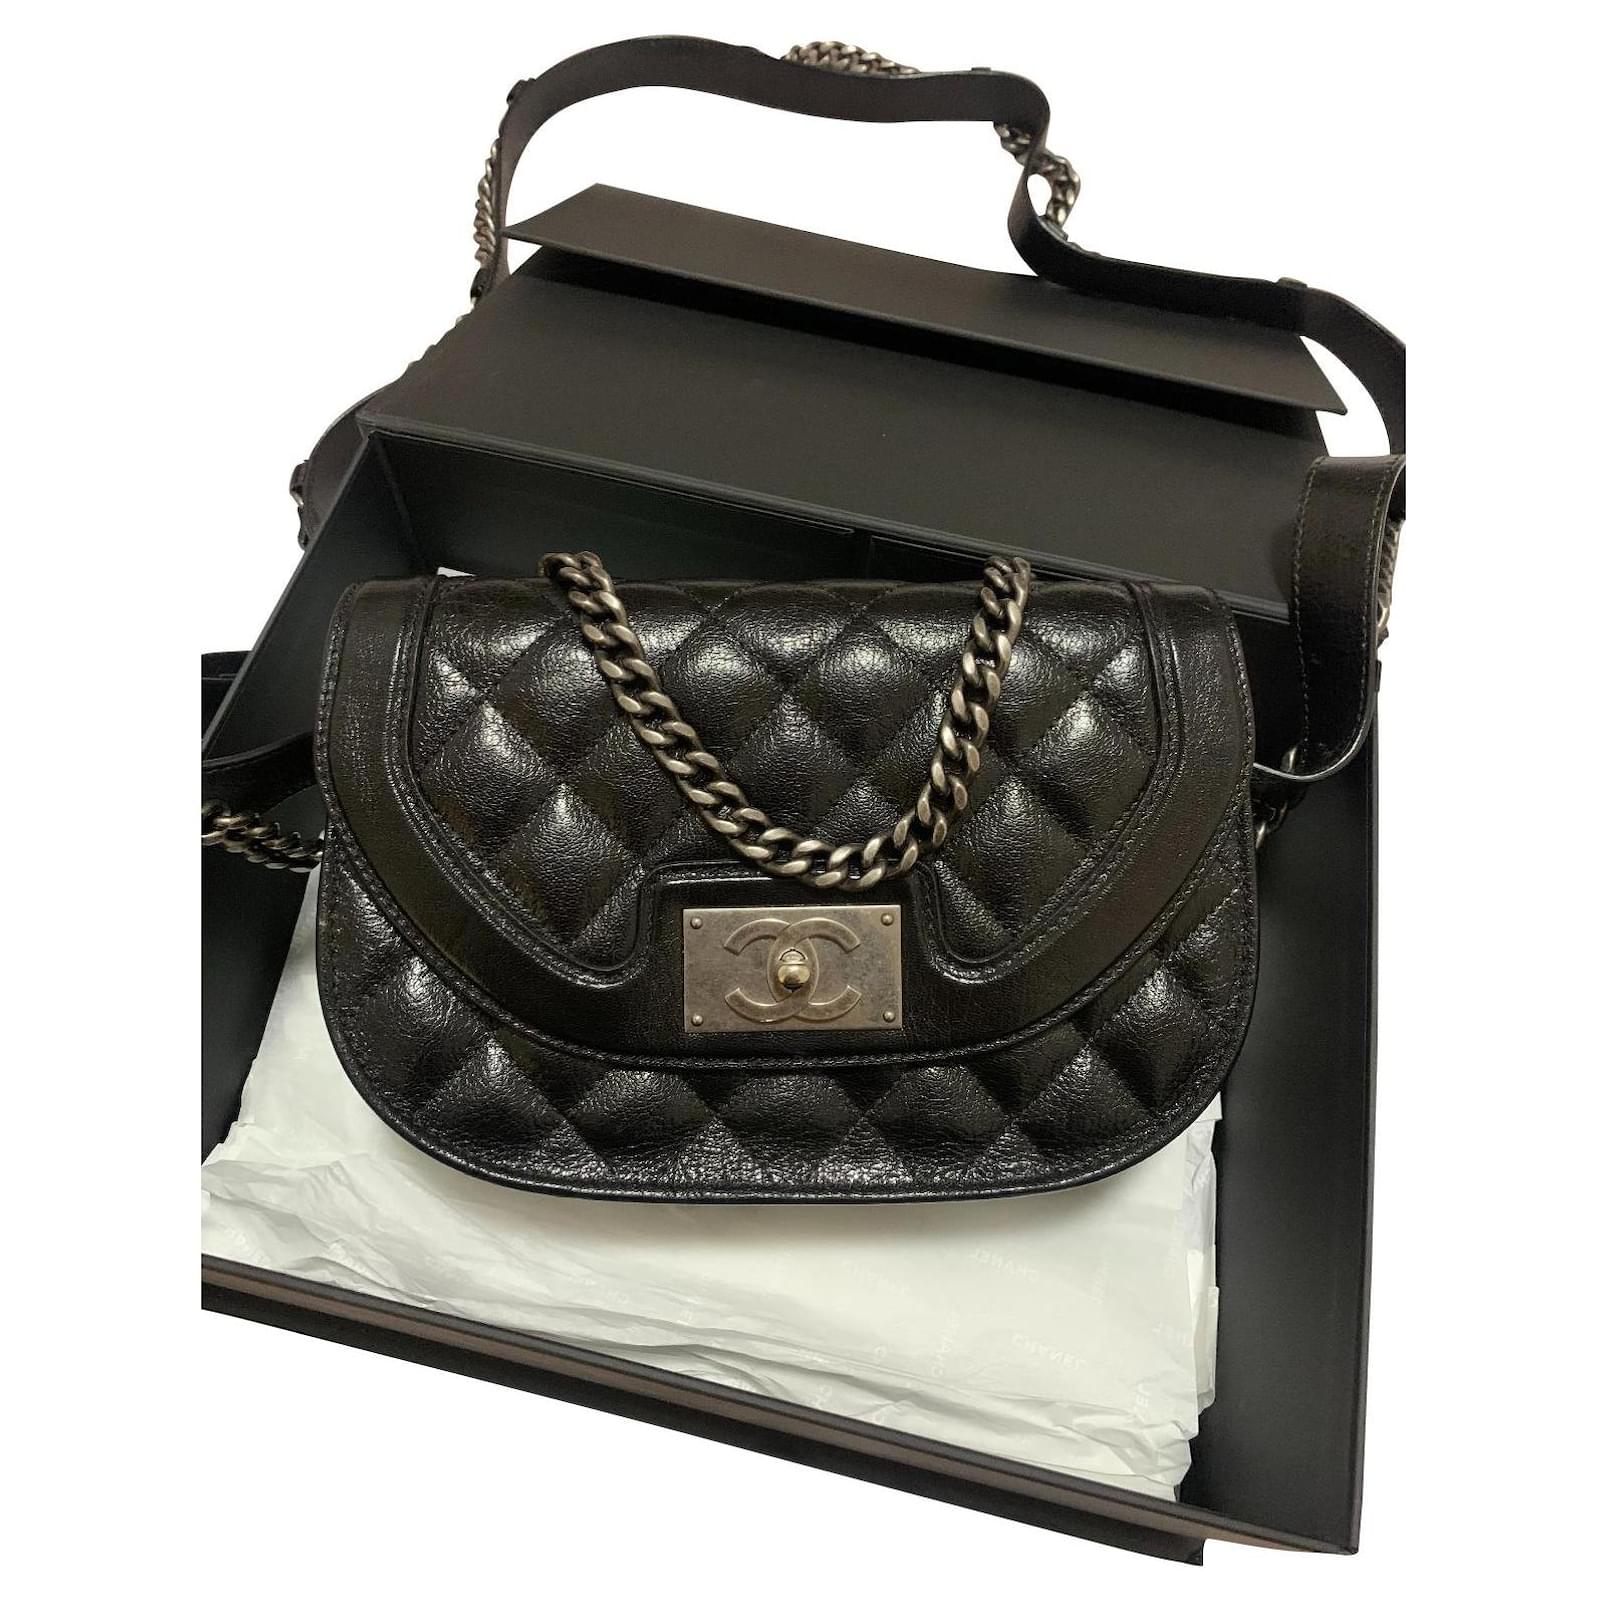 Chanel Women Bag Limited Edition